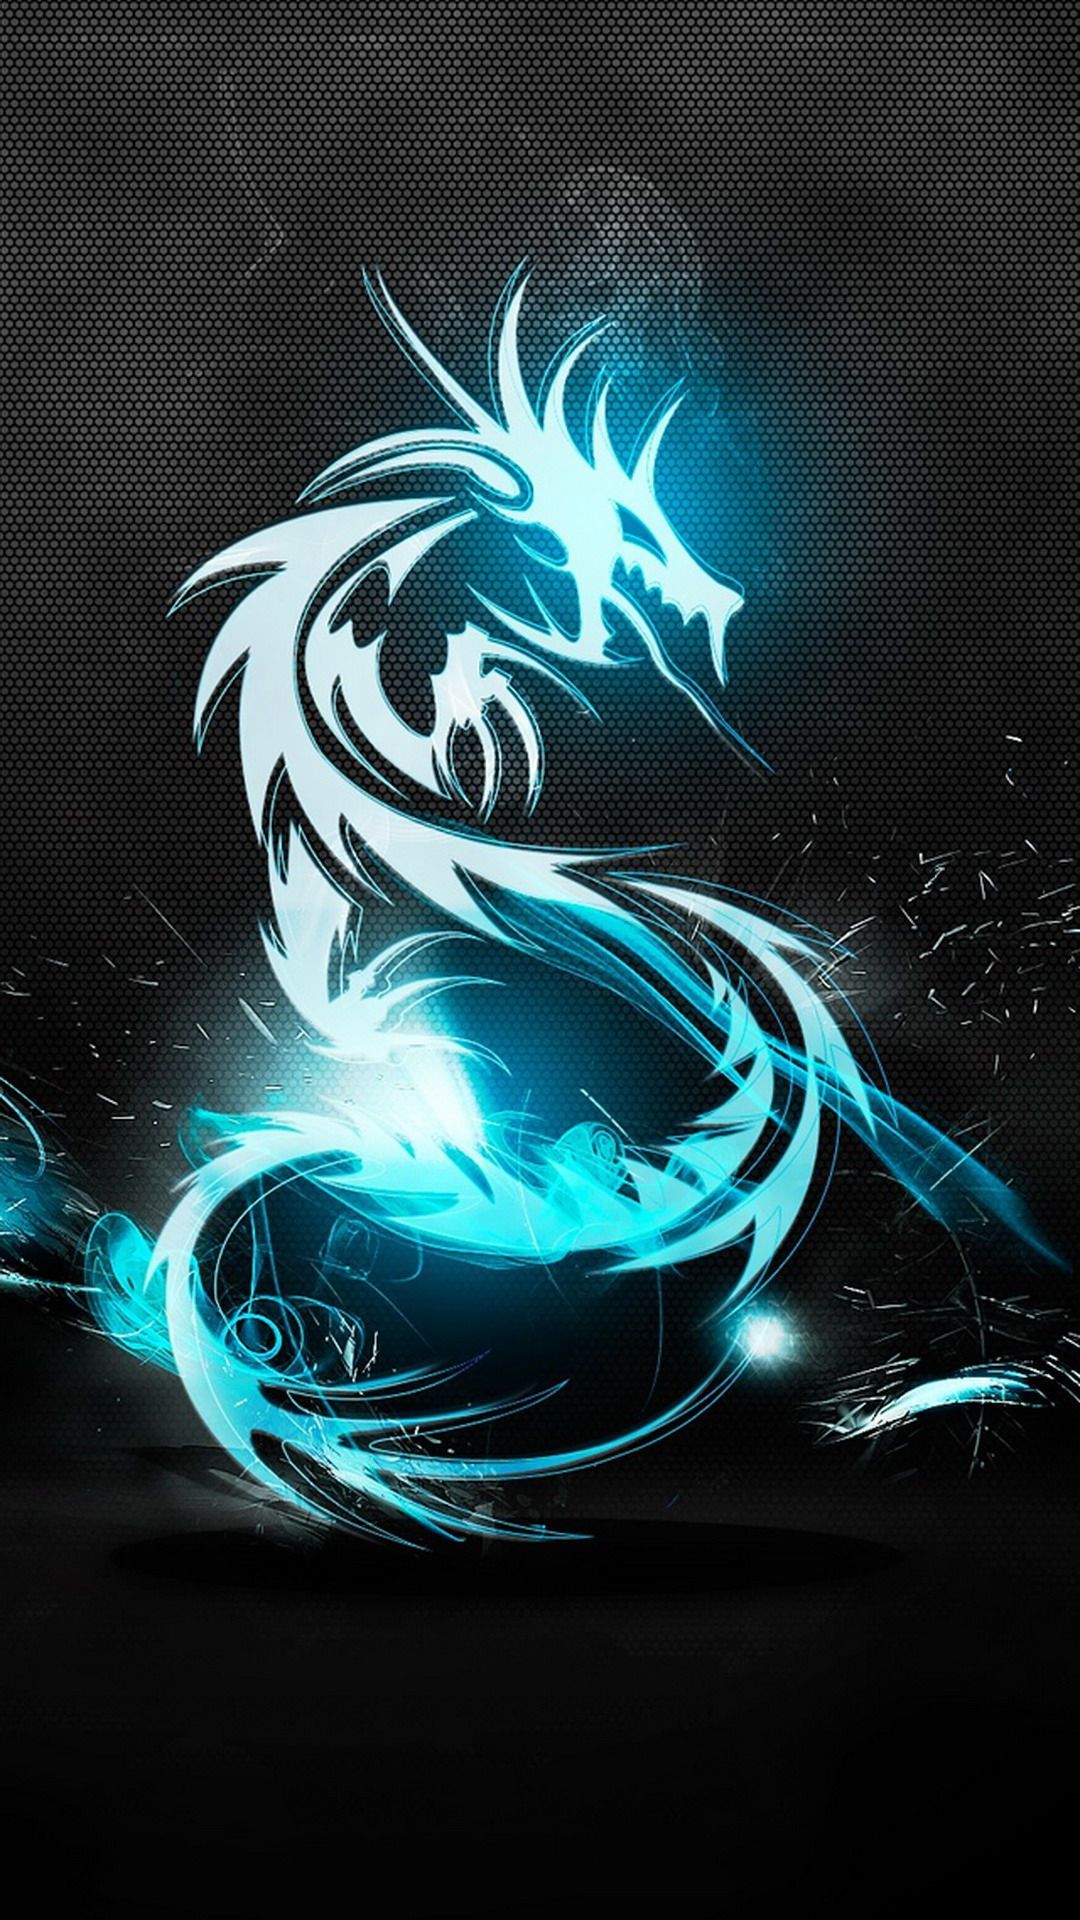 Full HD Abstract Dragon Wallpapers For Mobile